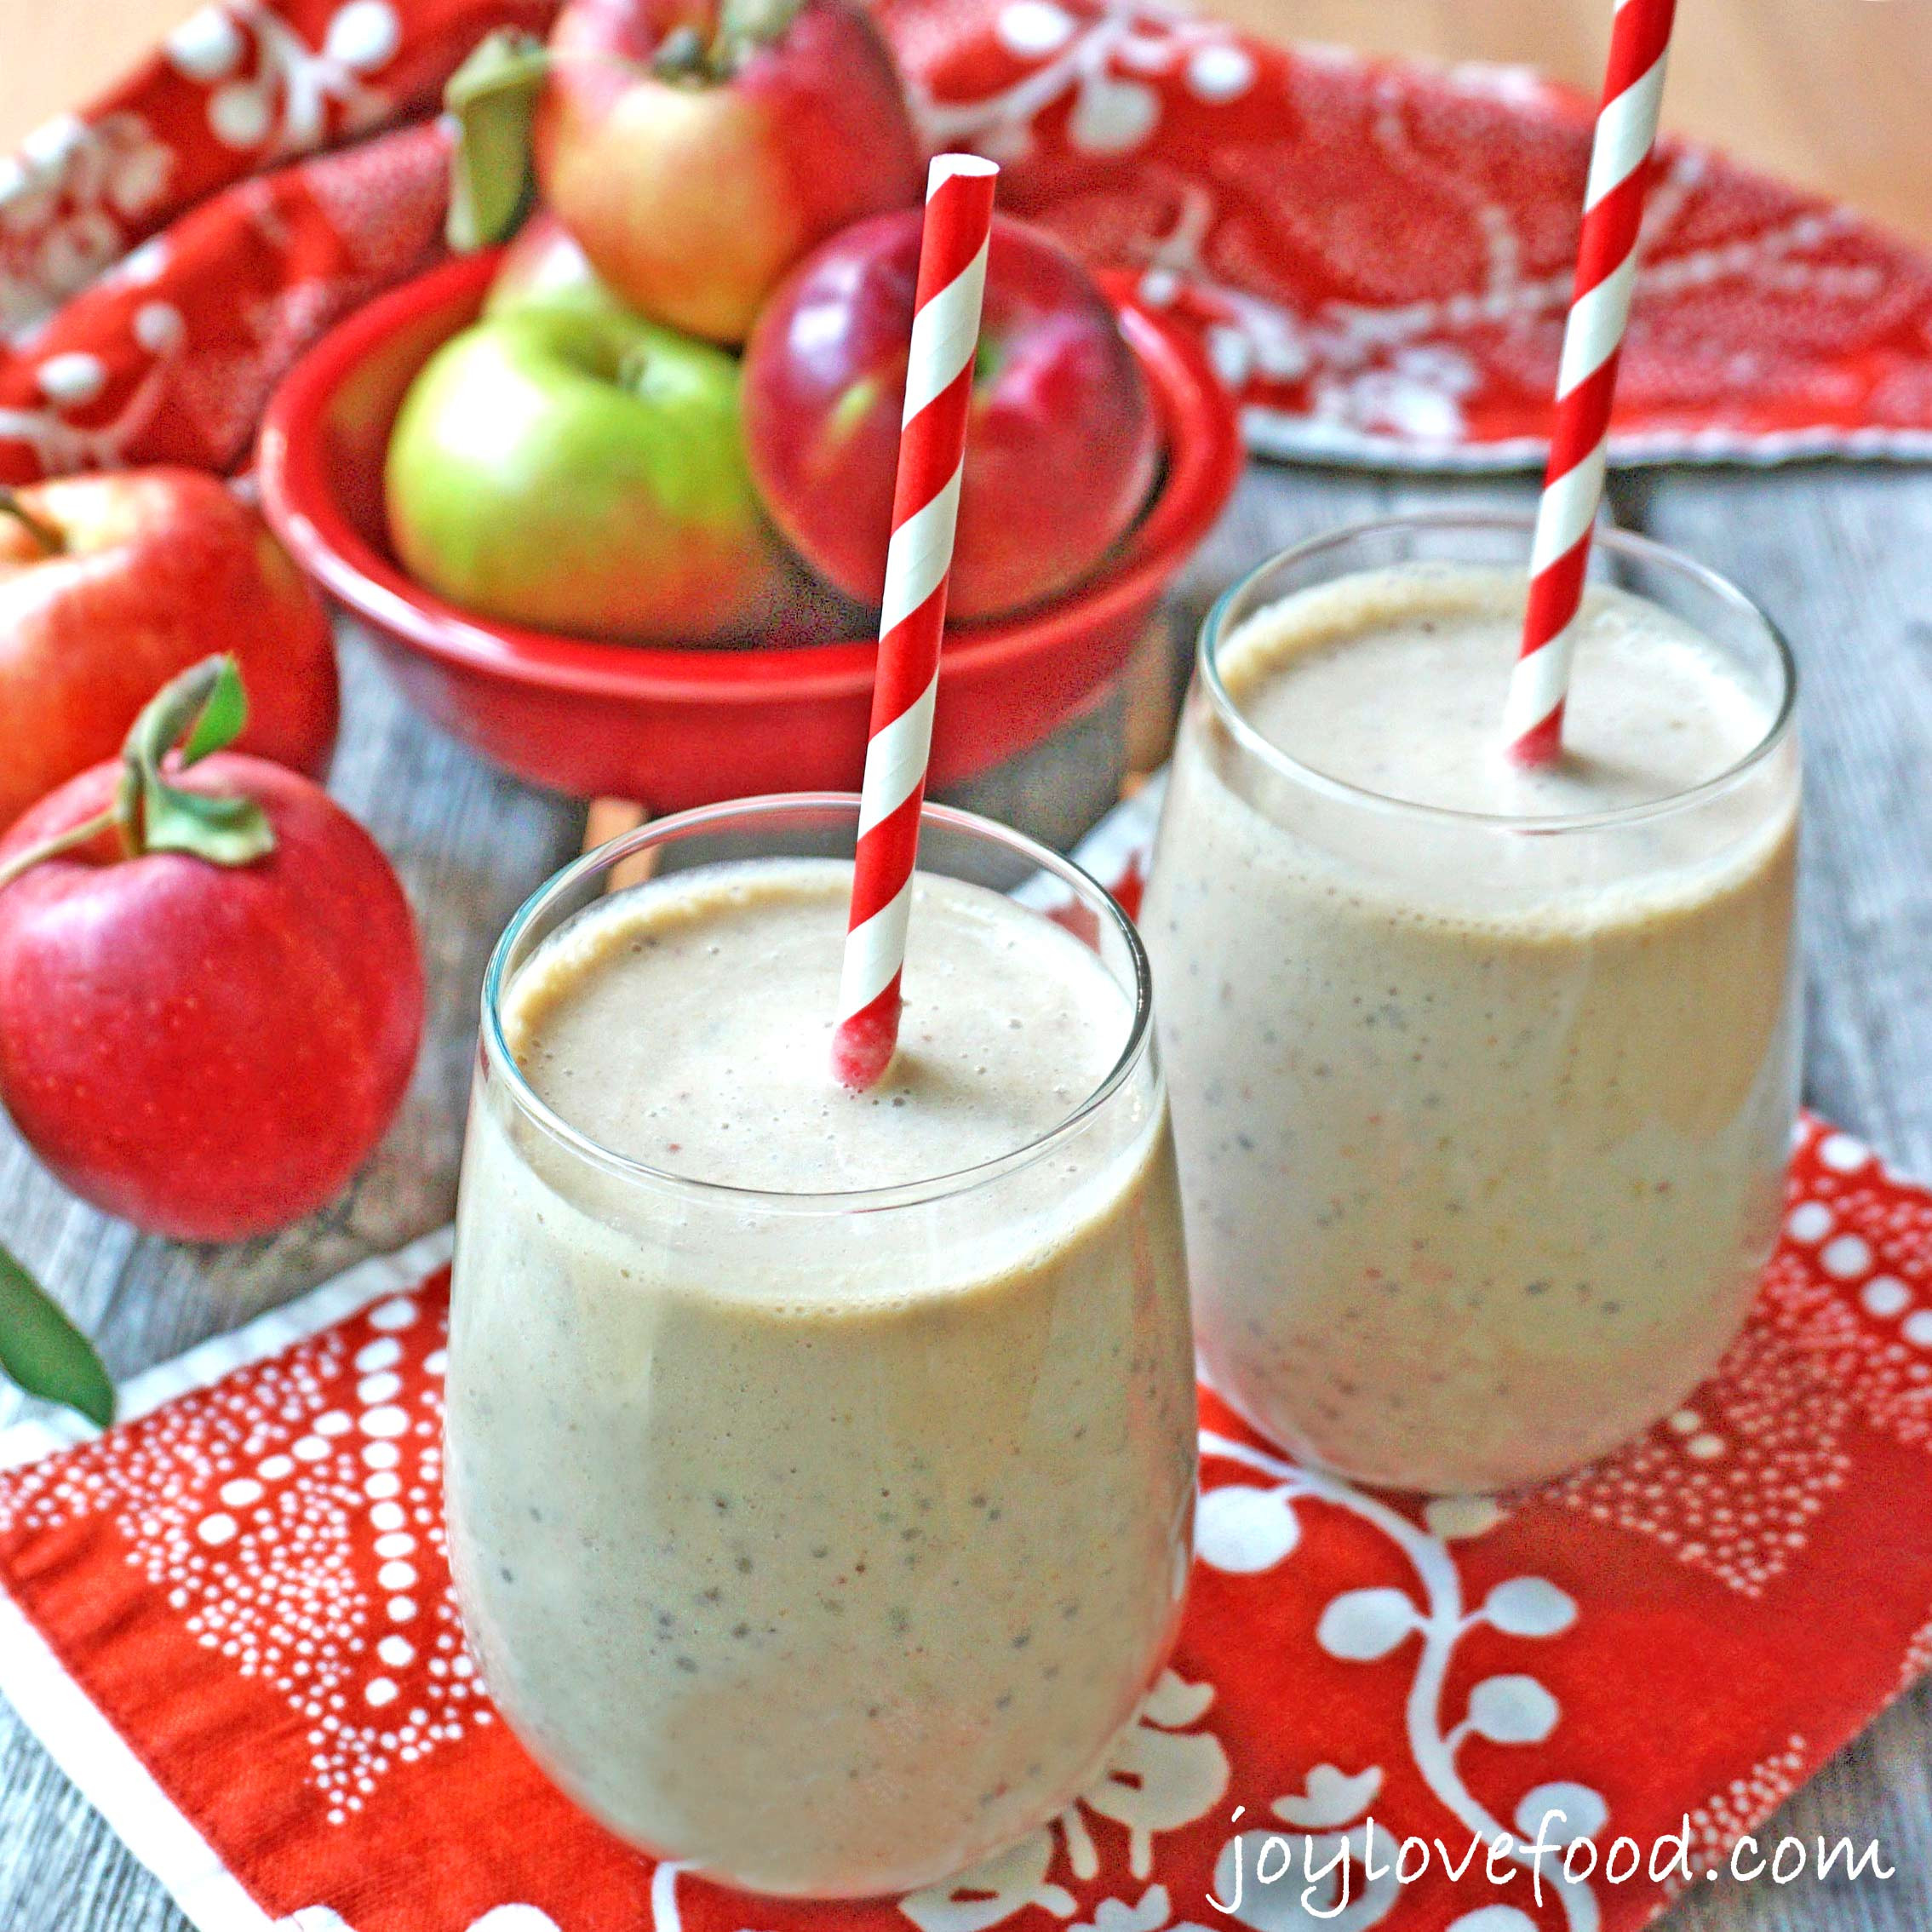 Healthy Seeds For Smoothies
 Apple Banana Chia Seed Smoothies Joy Love Food